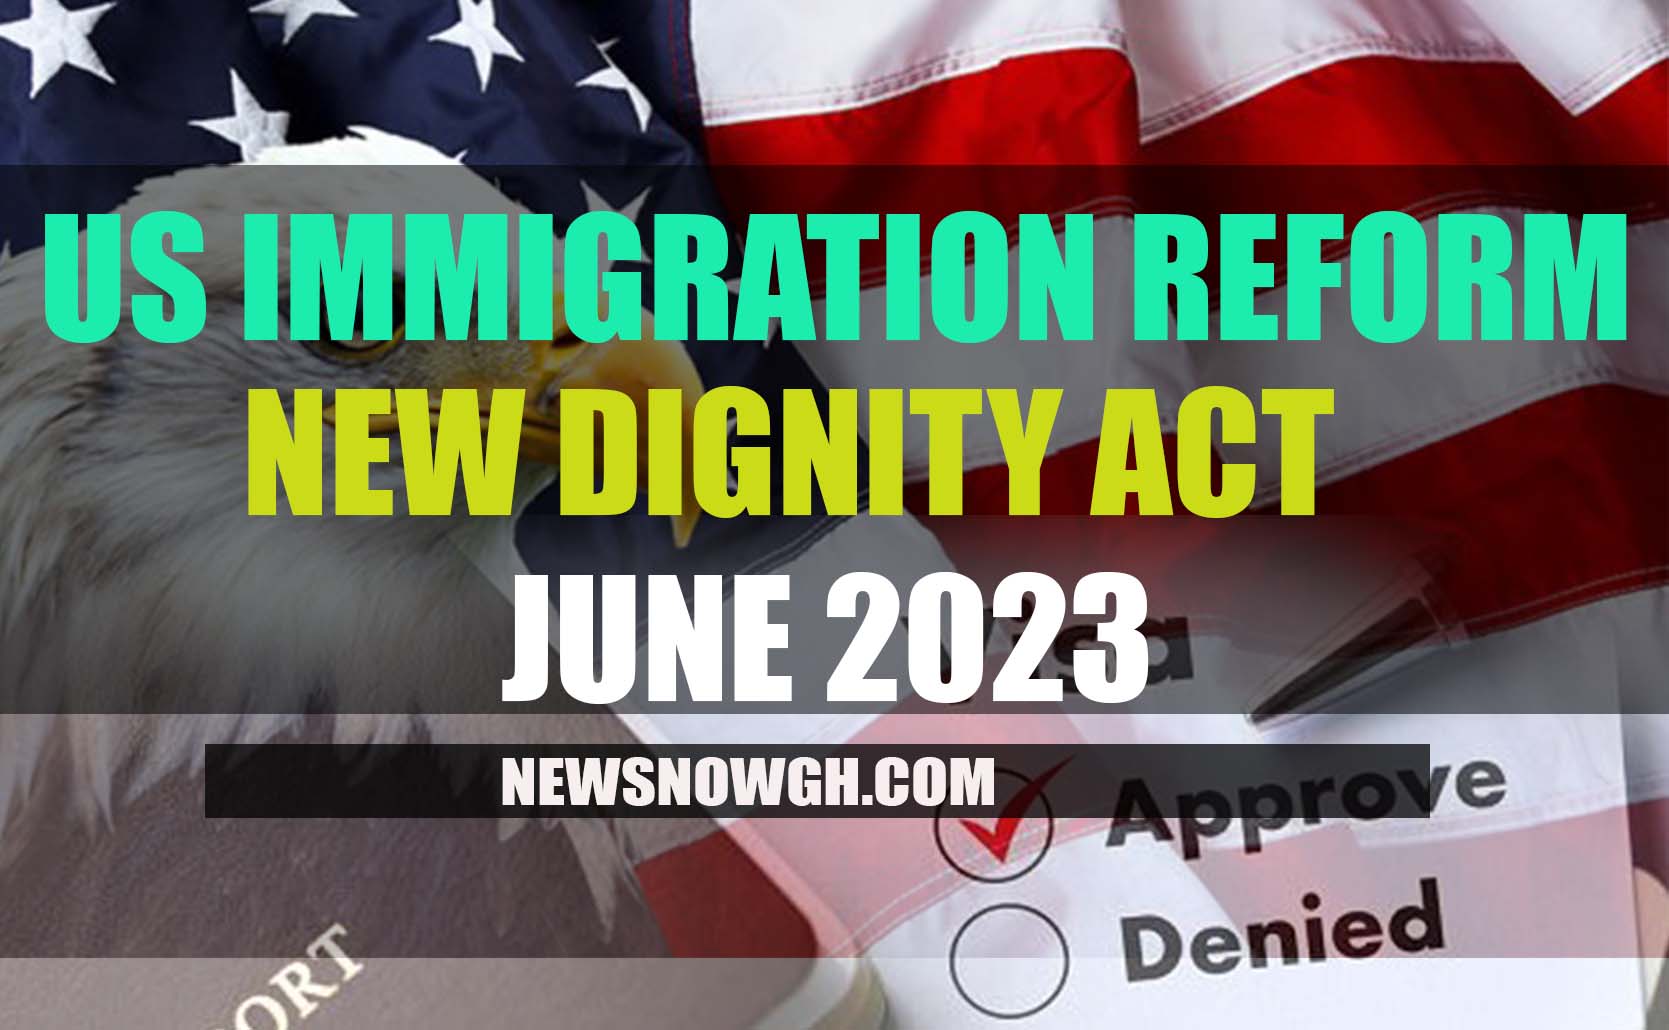 New Dignity Act June 2023 US Immigration Reform